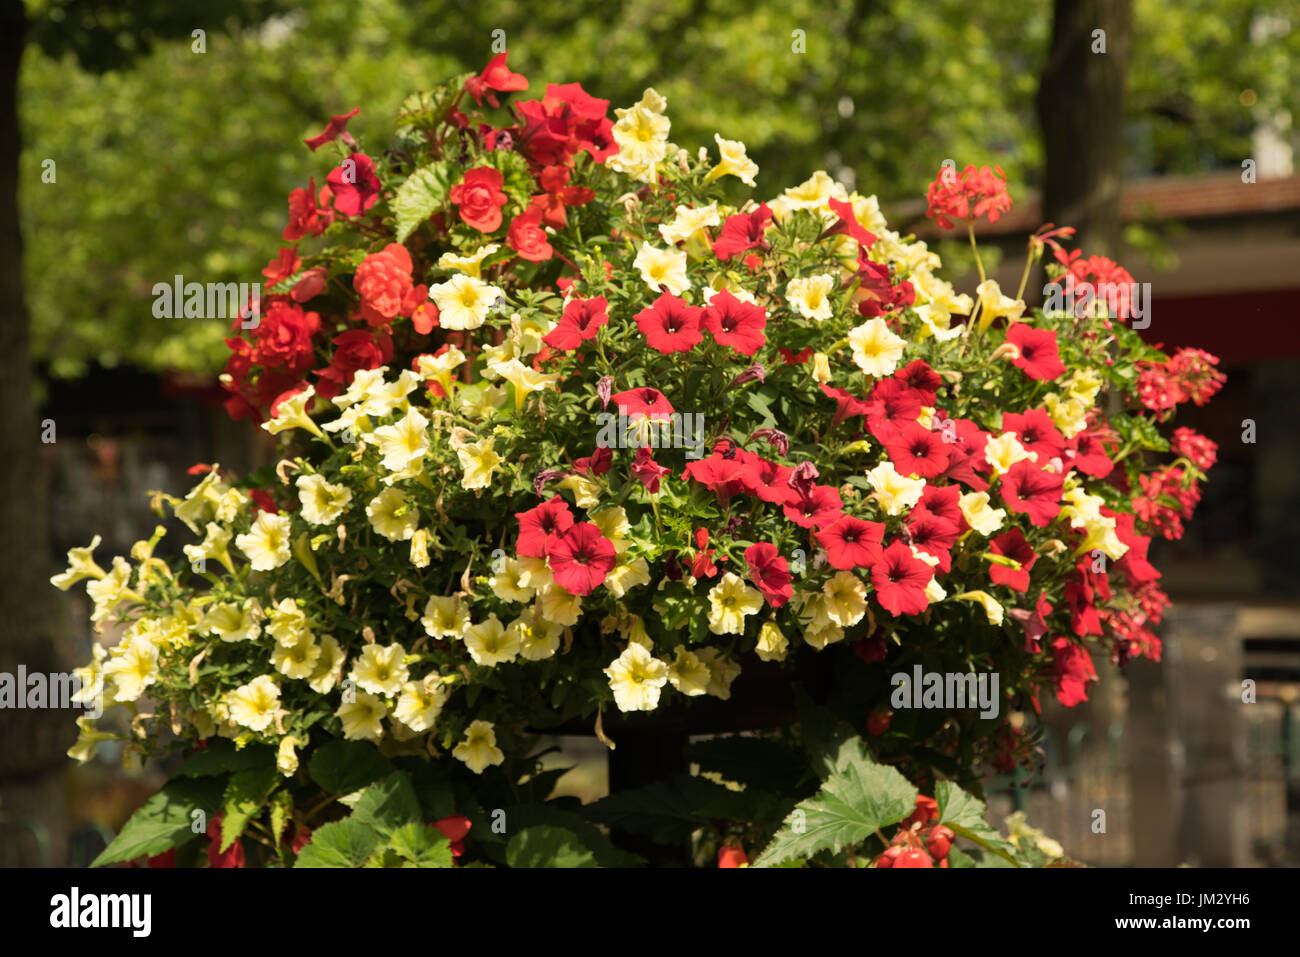 hanging basket of red and yellow trailing surfinia begonias and begonias Stock Photo